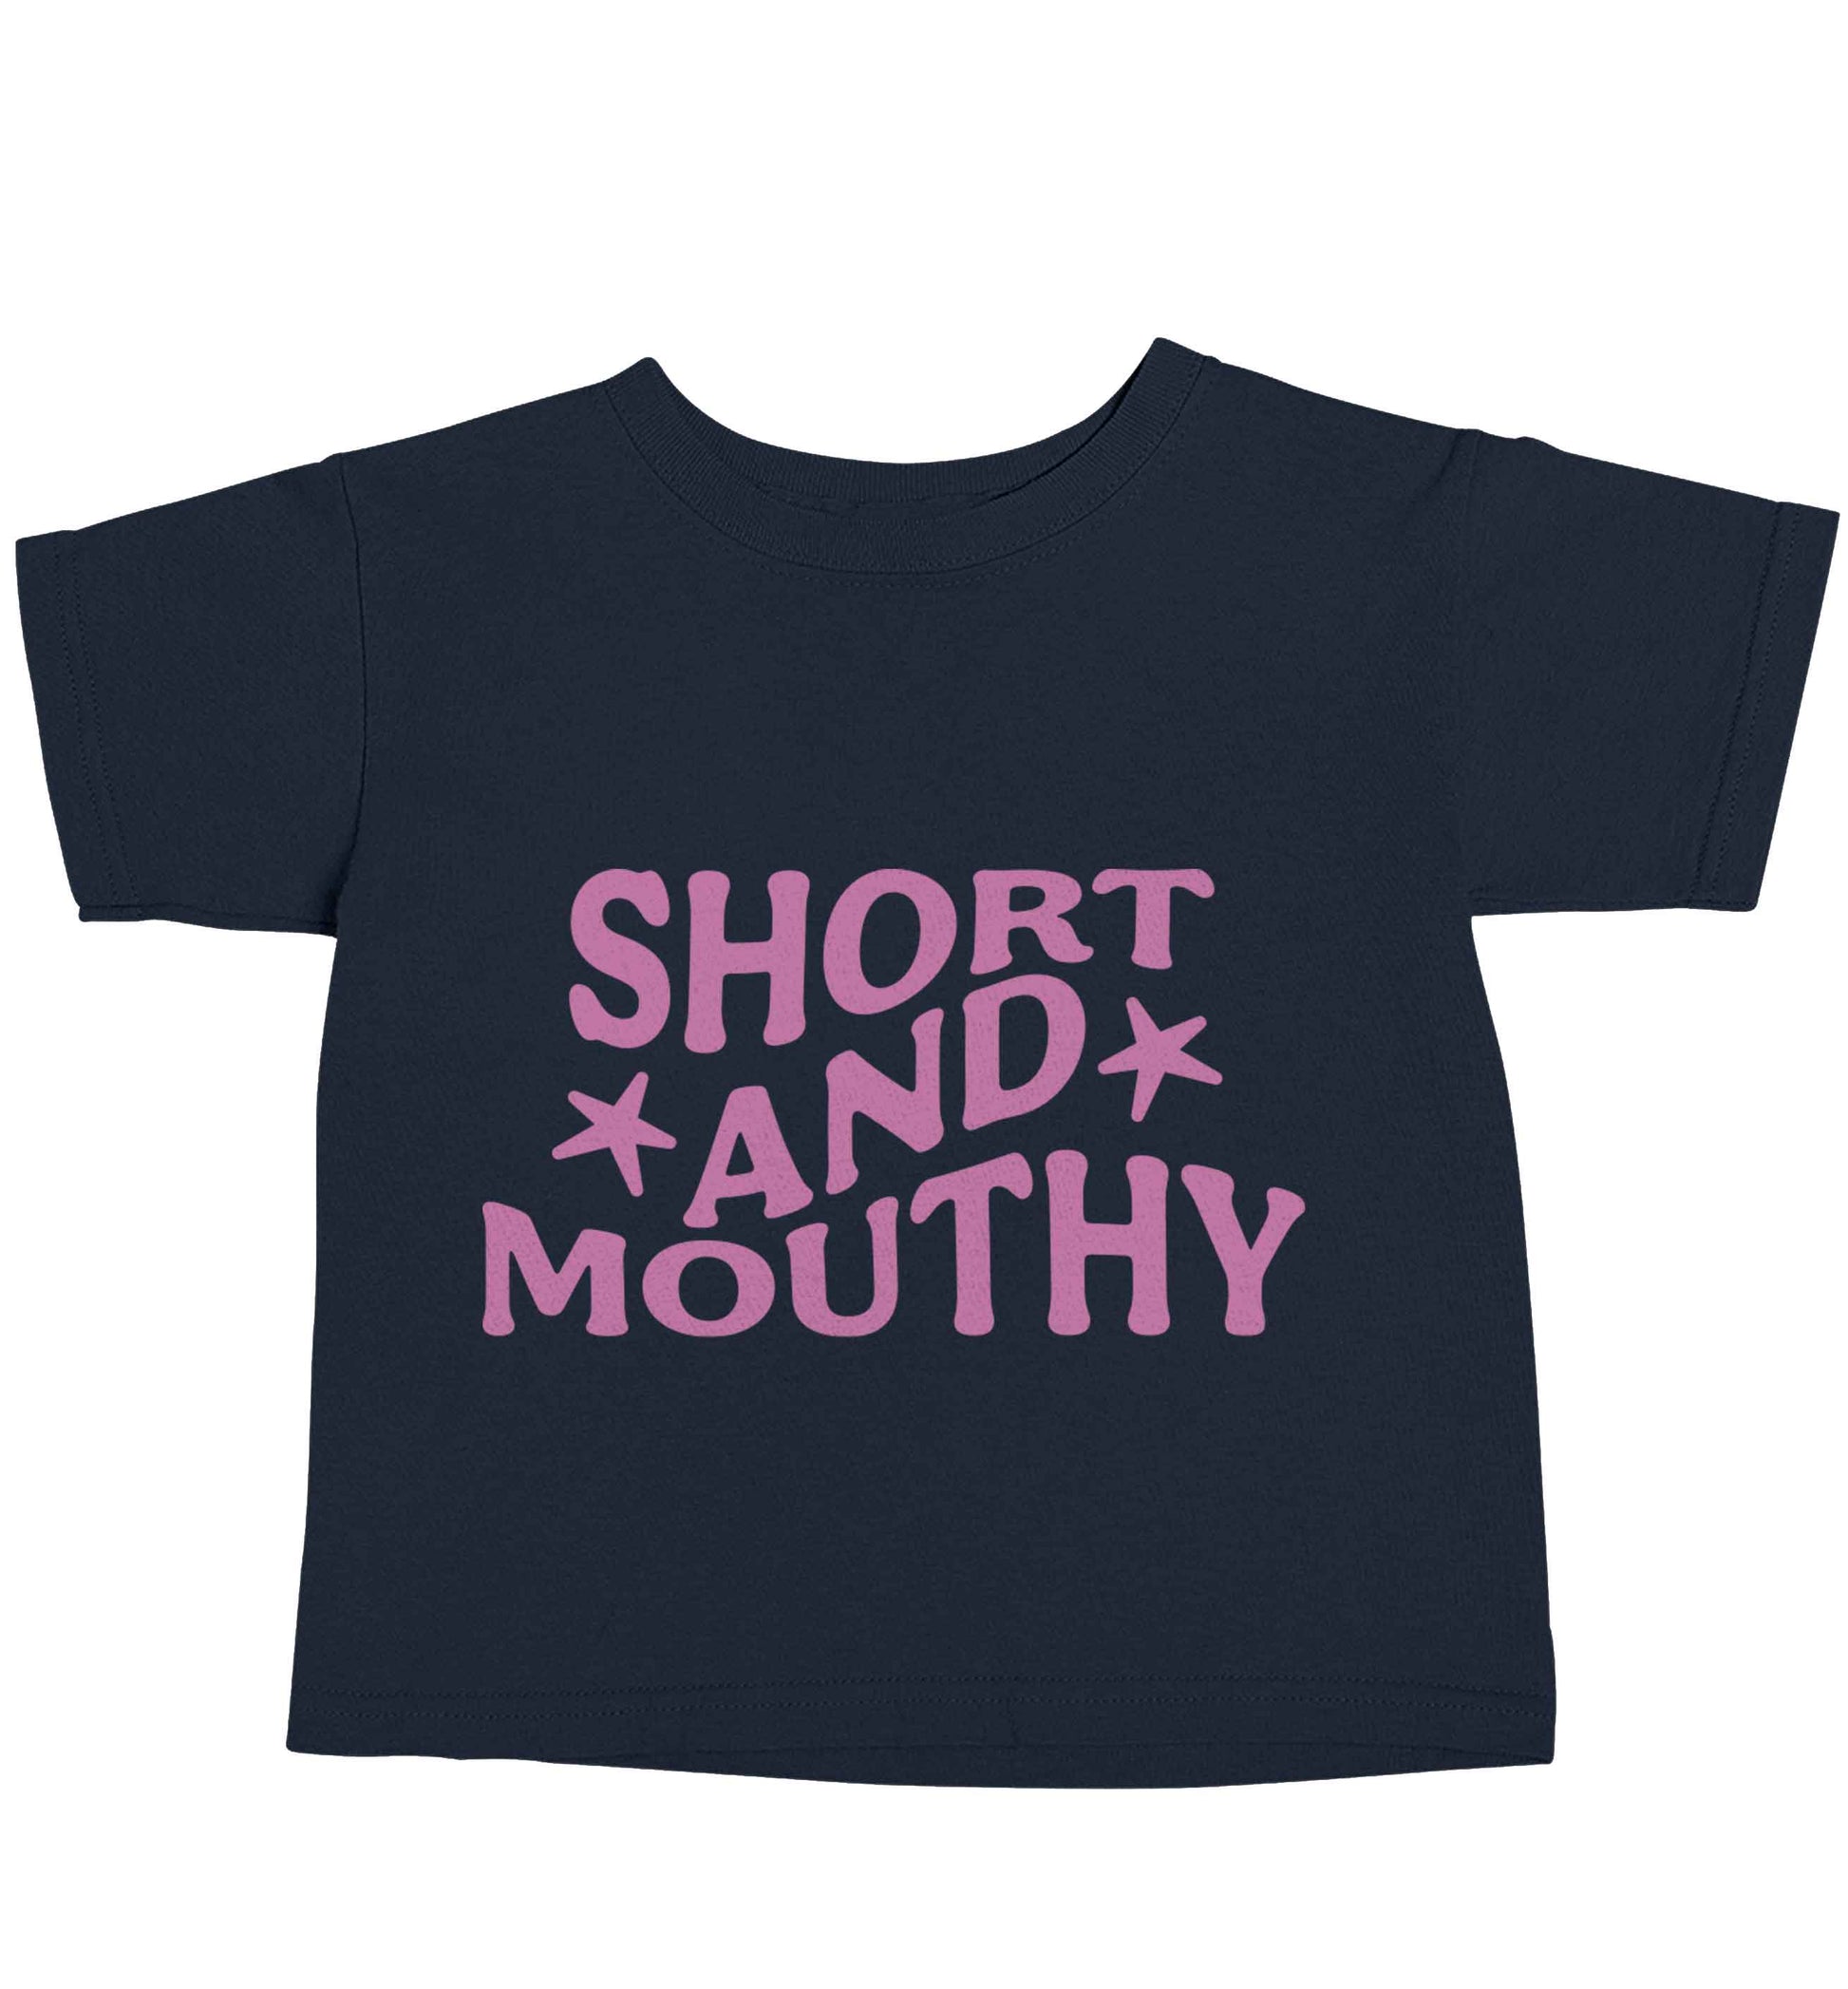 Short and mouthy navy baby toddler Tshirt 2 Years